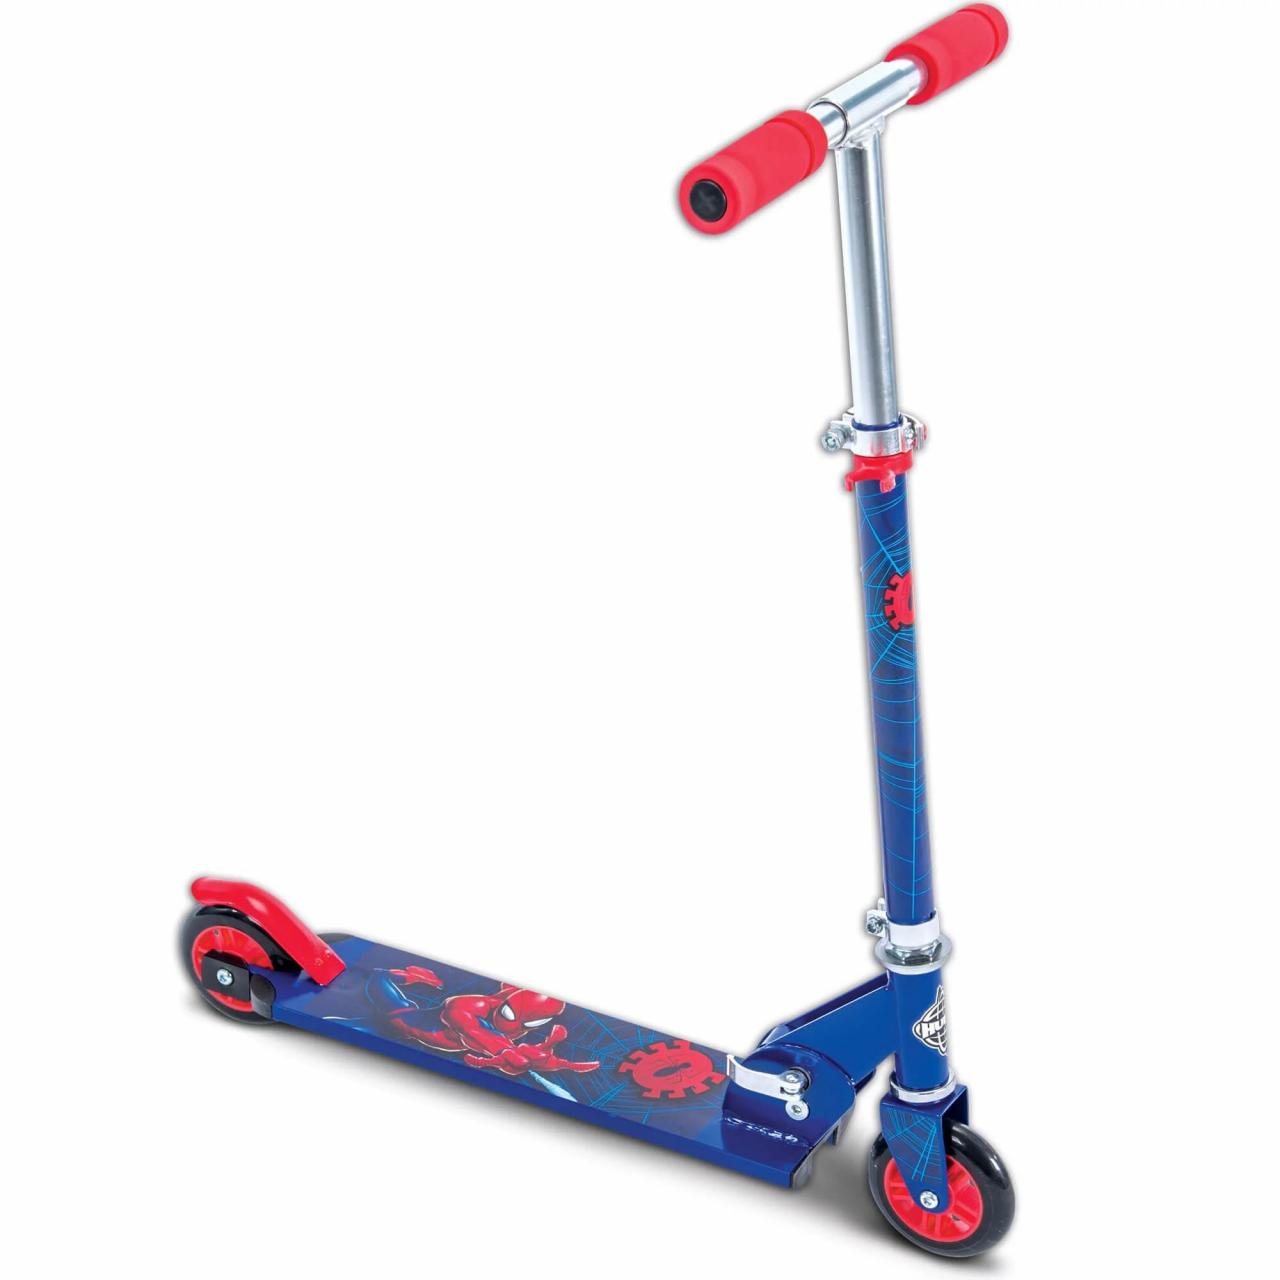 Marvel SpiderMan Boys' Inline Folding Scooter, by Huffy